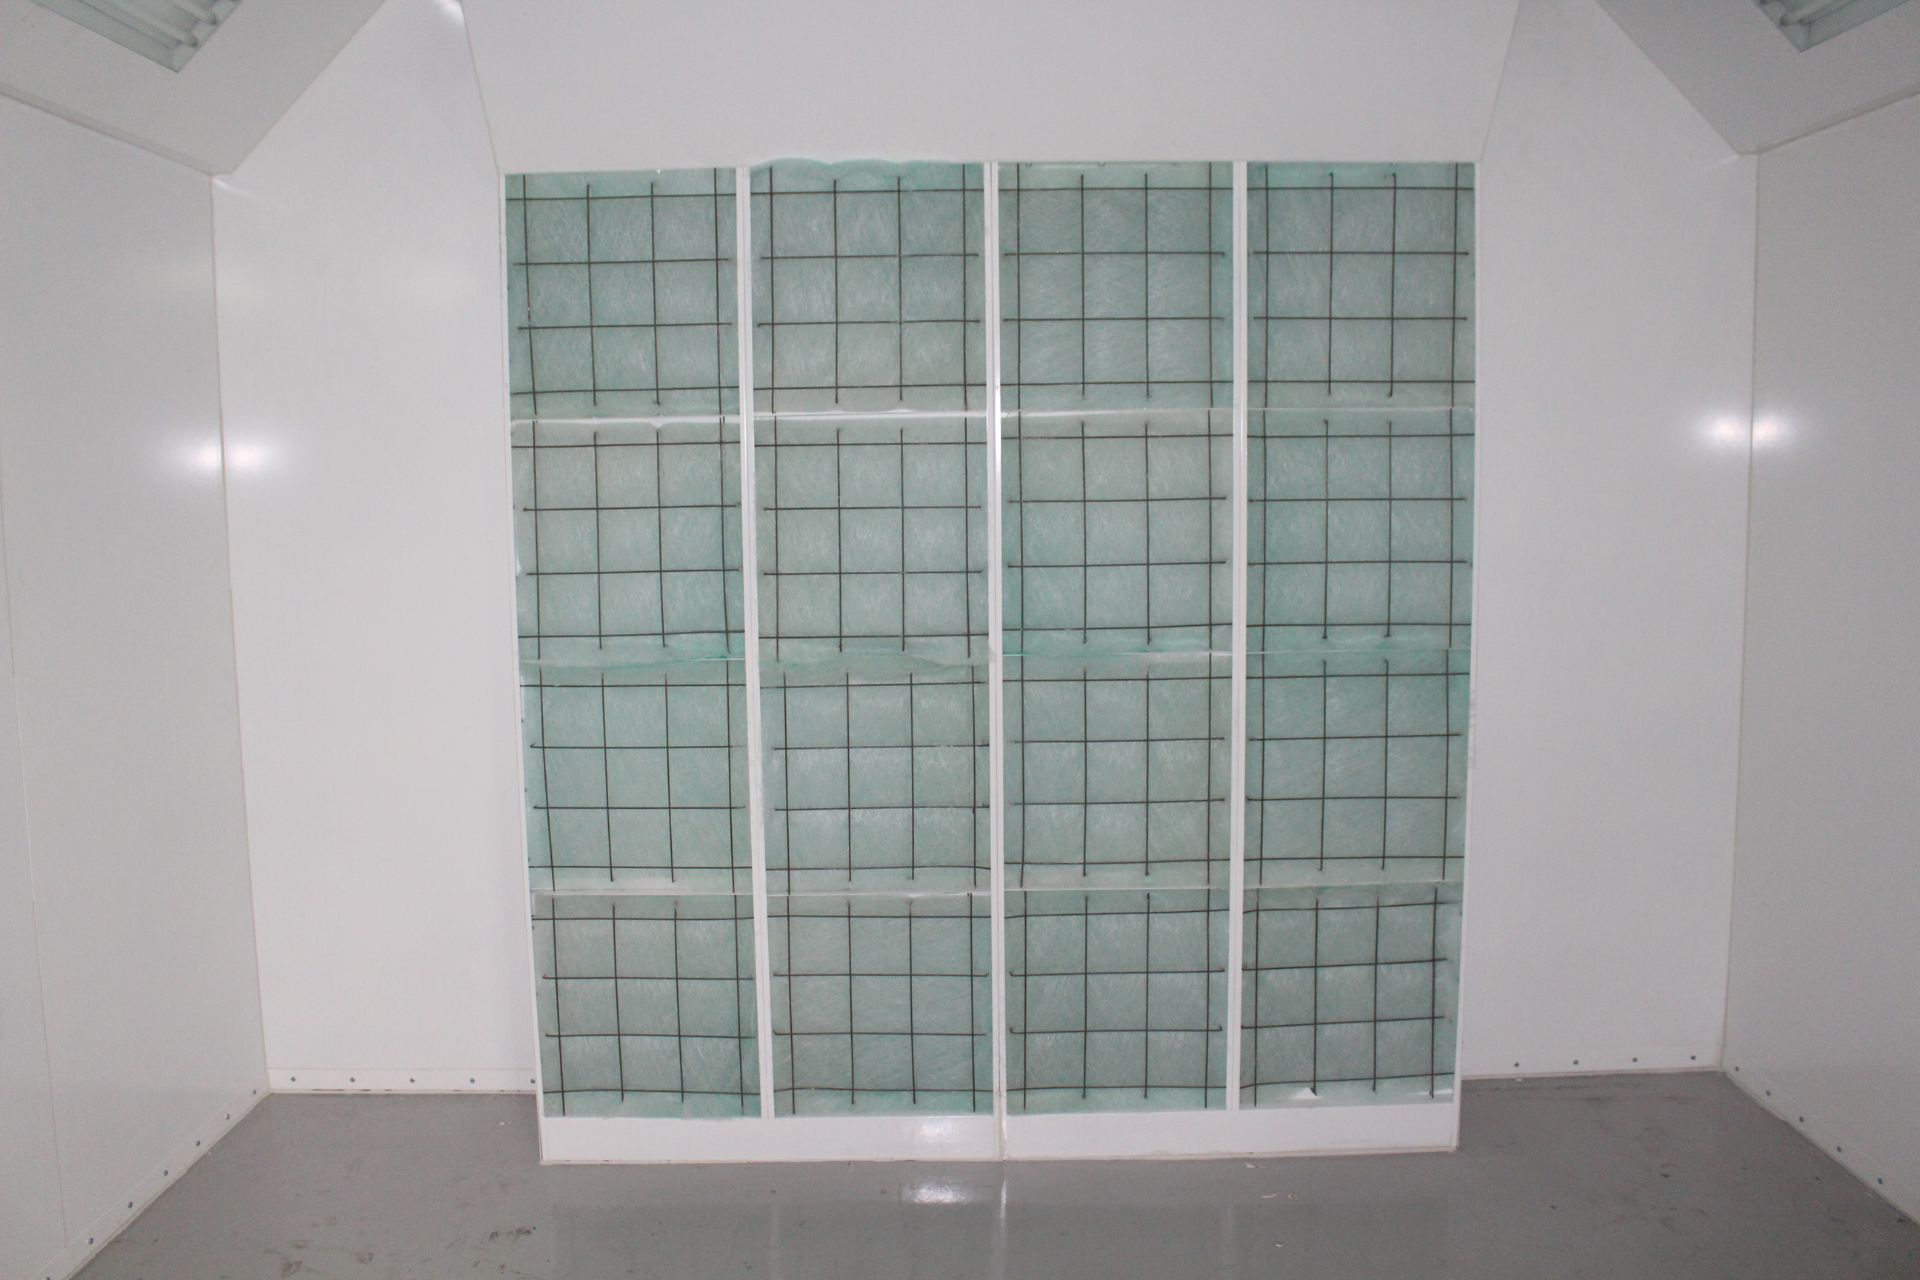 SPRAY ZONE PAINT SPRAY BOOTH, BRAND NEW, 169" LONG X 143" WIDE INSIDE DIMENSION - Image 12 of 15